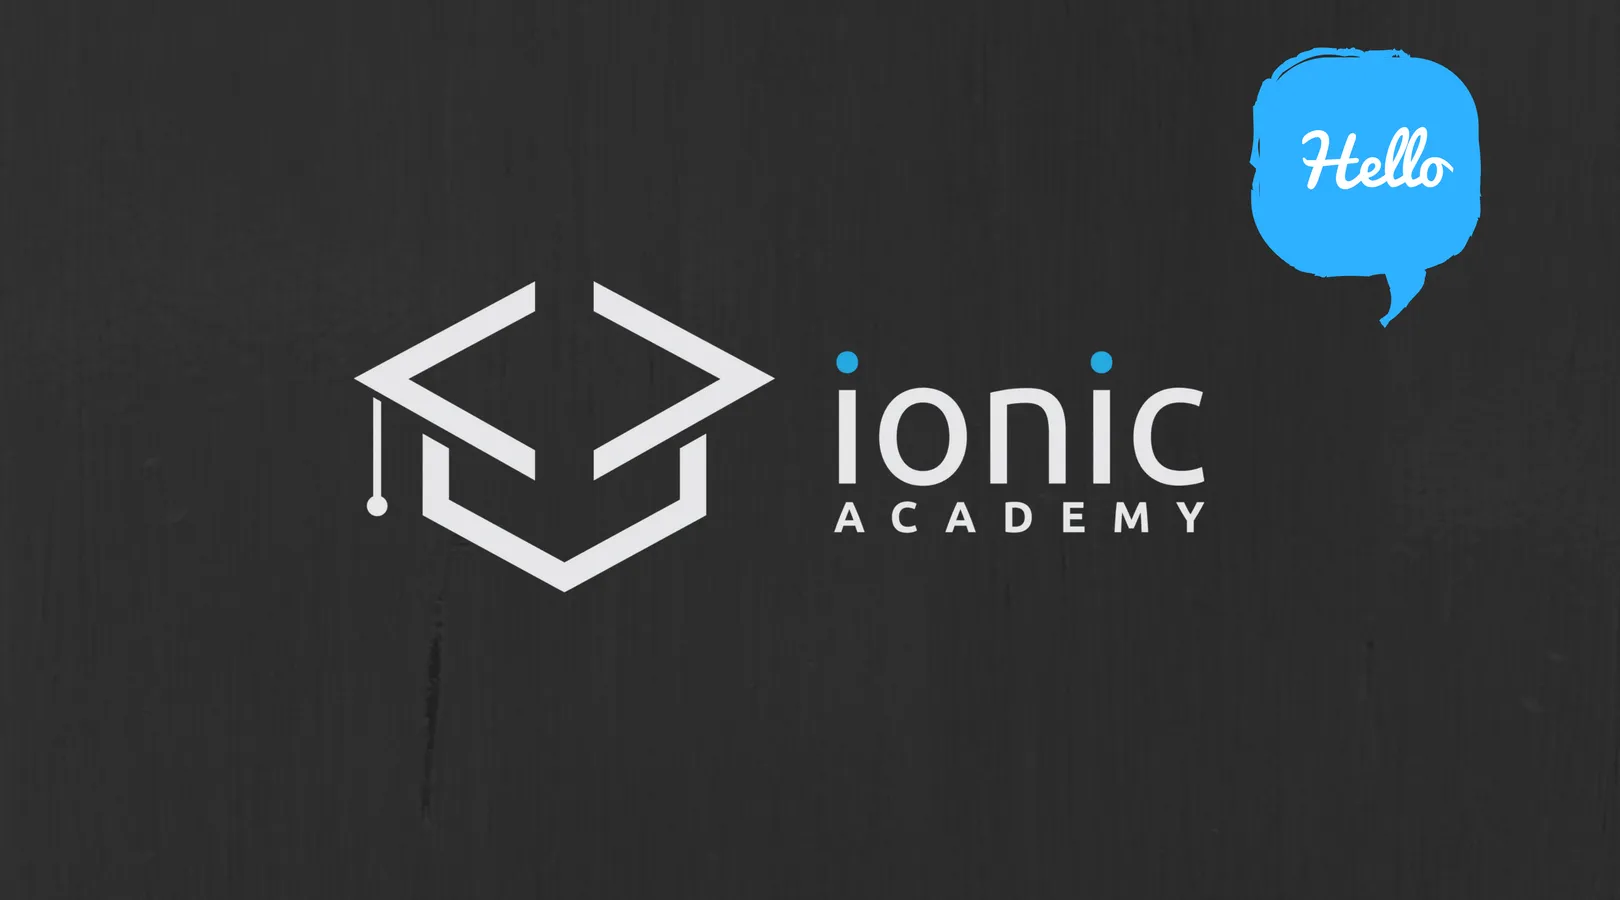 The Beginning of the Ionic Academy